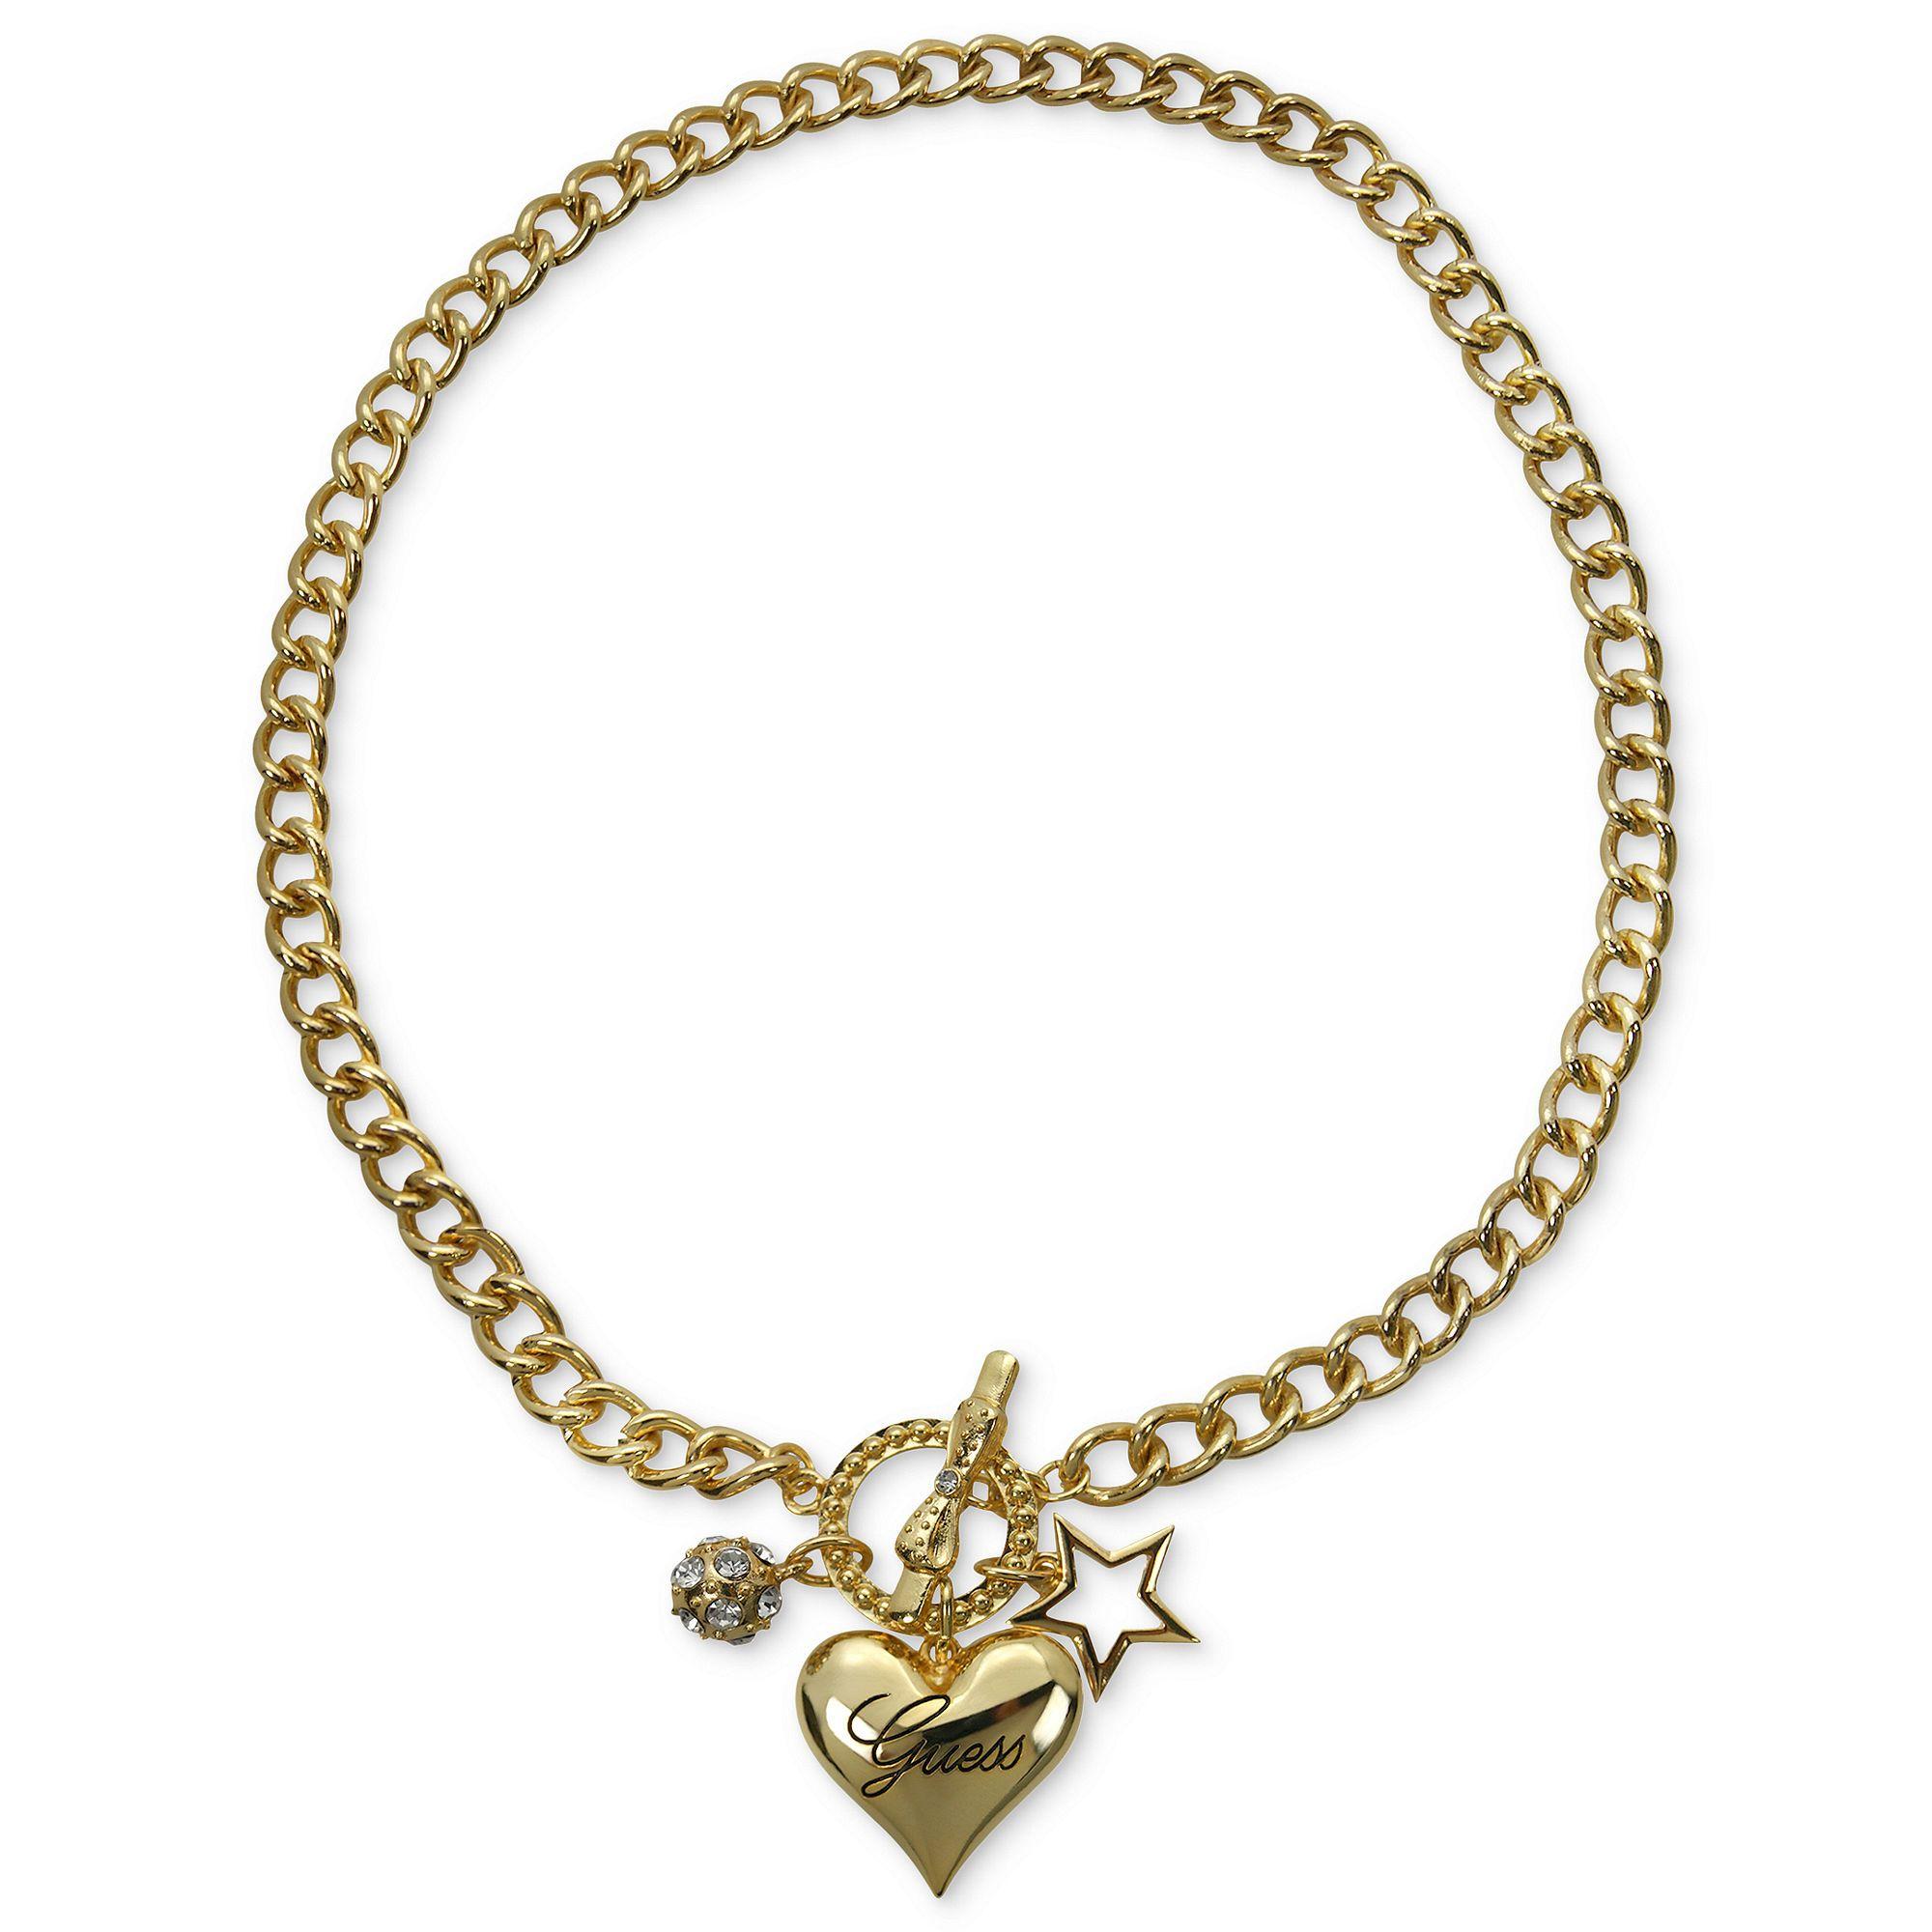 Star in Heart Logo - Lyst - Guess Necklace Gold Tone Heart Logo Fire Ball and Star ...